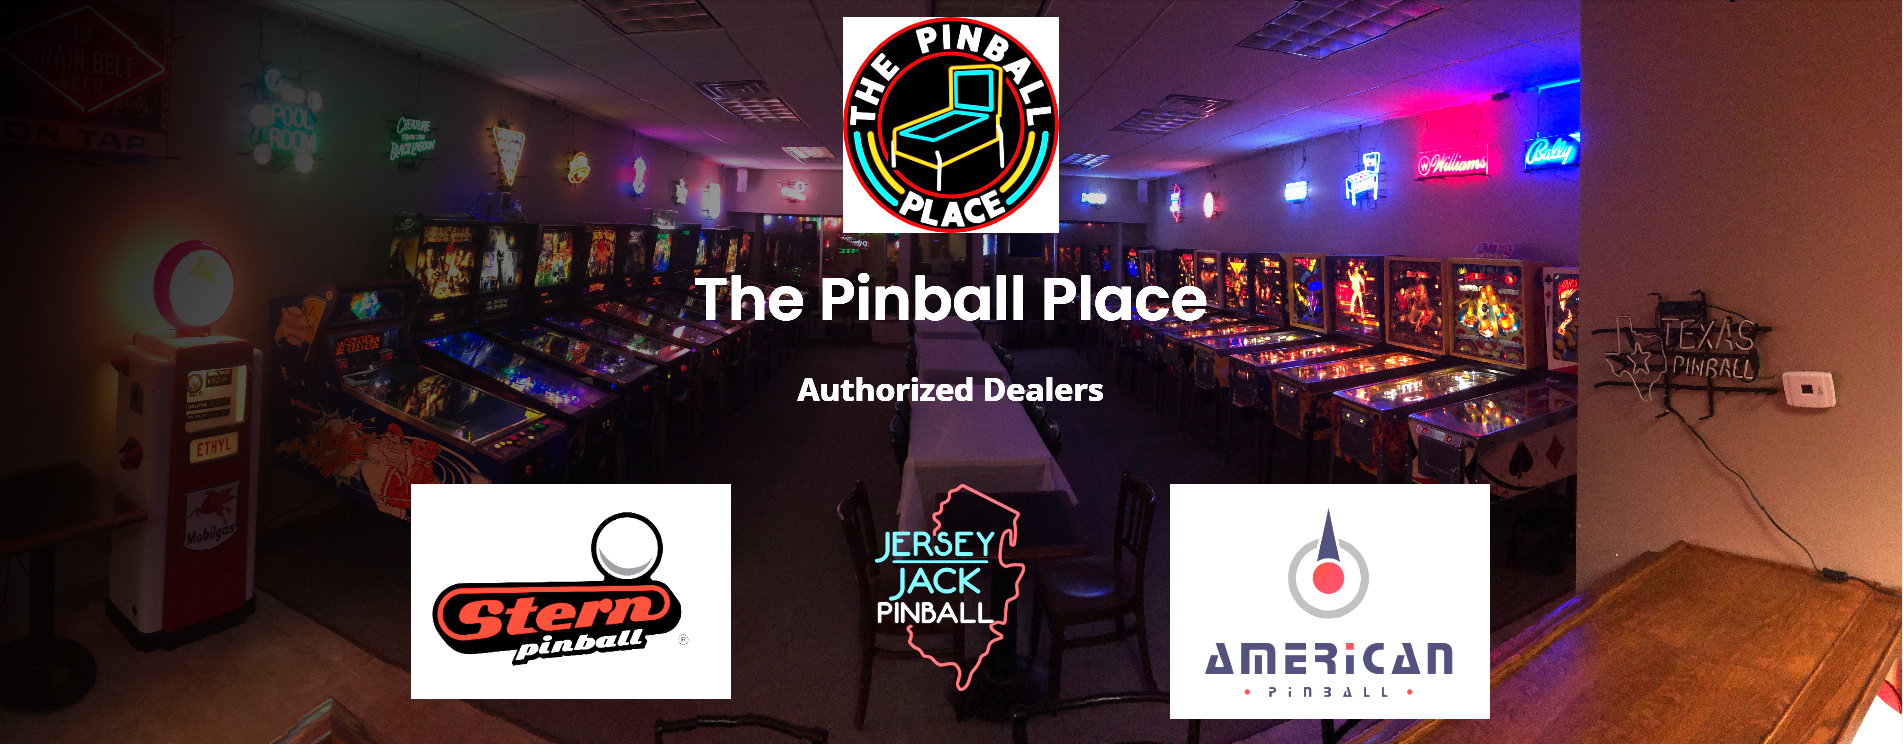 The Pinball Place